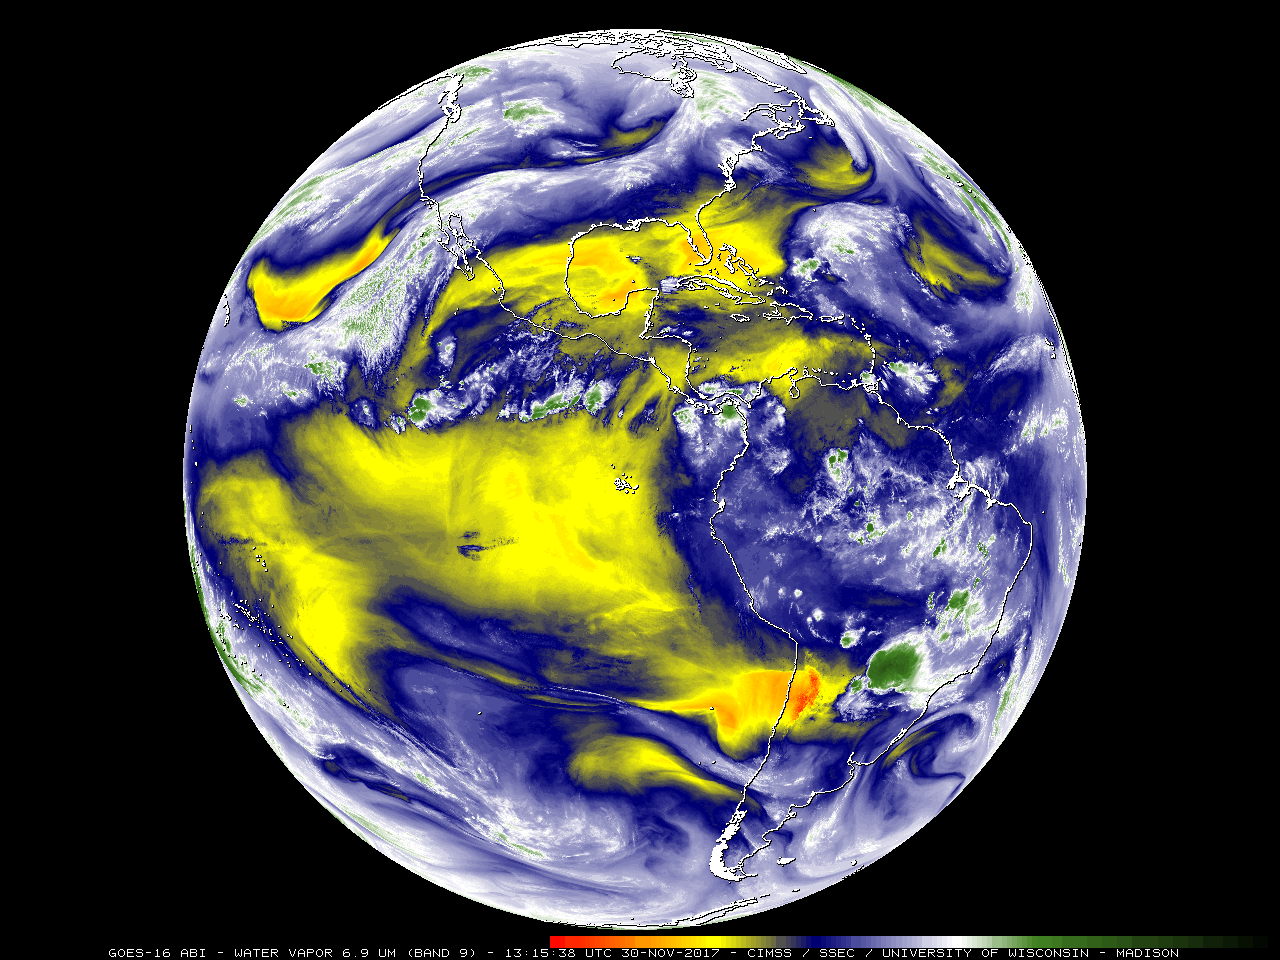 GOES-16 Water Vapor (6.9 µm) images (Click to animate)